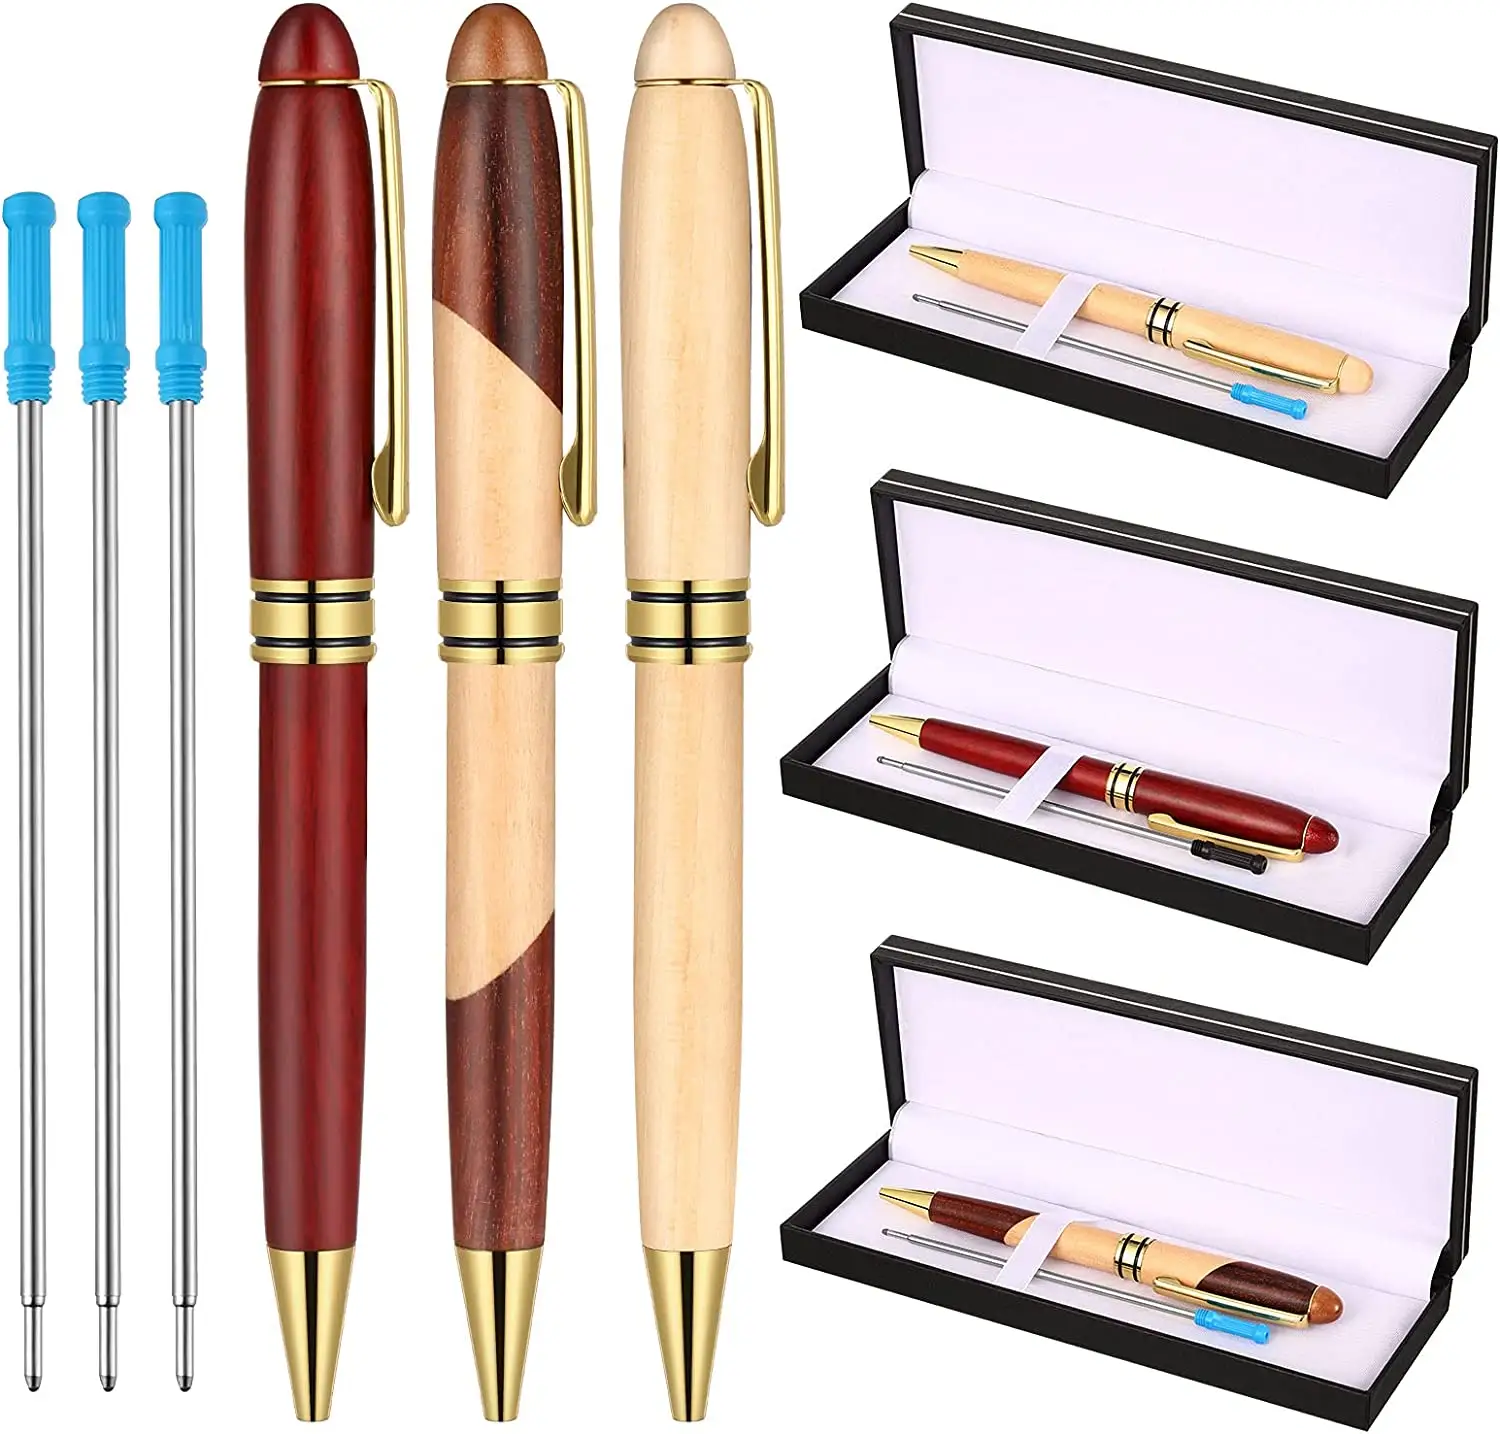 High quality handmade wooden pen, wood burning pen with wood bamboo pen case